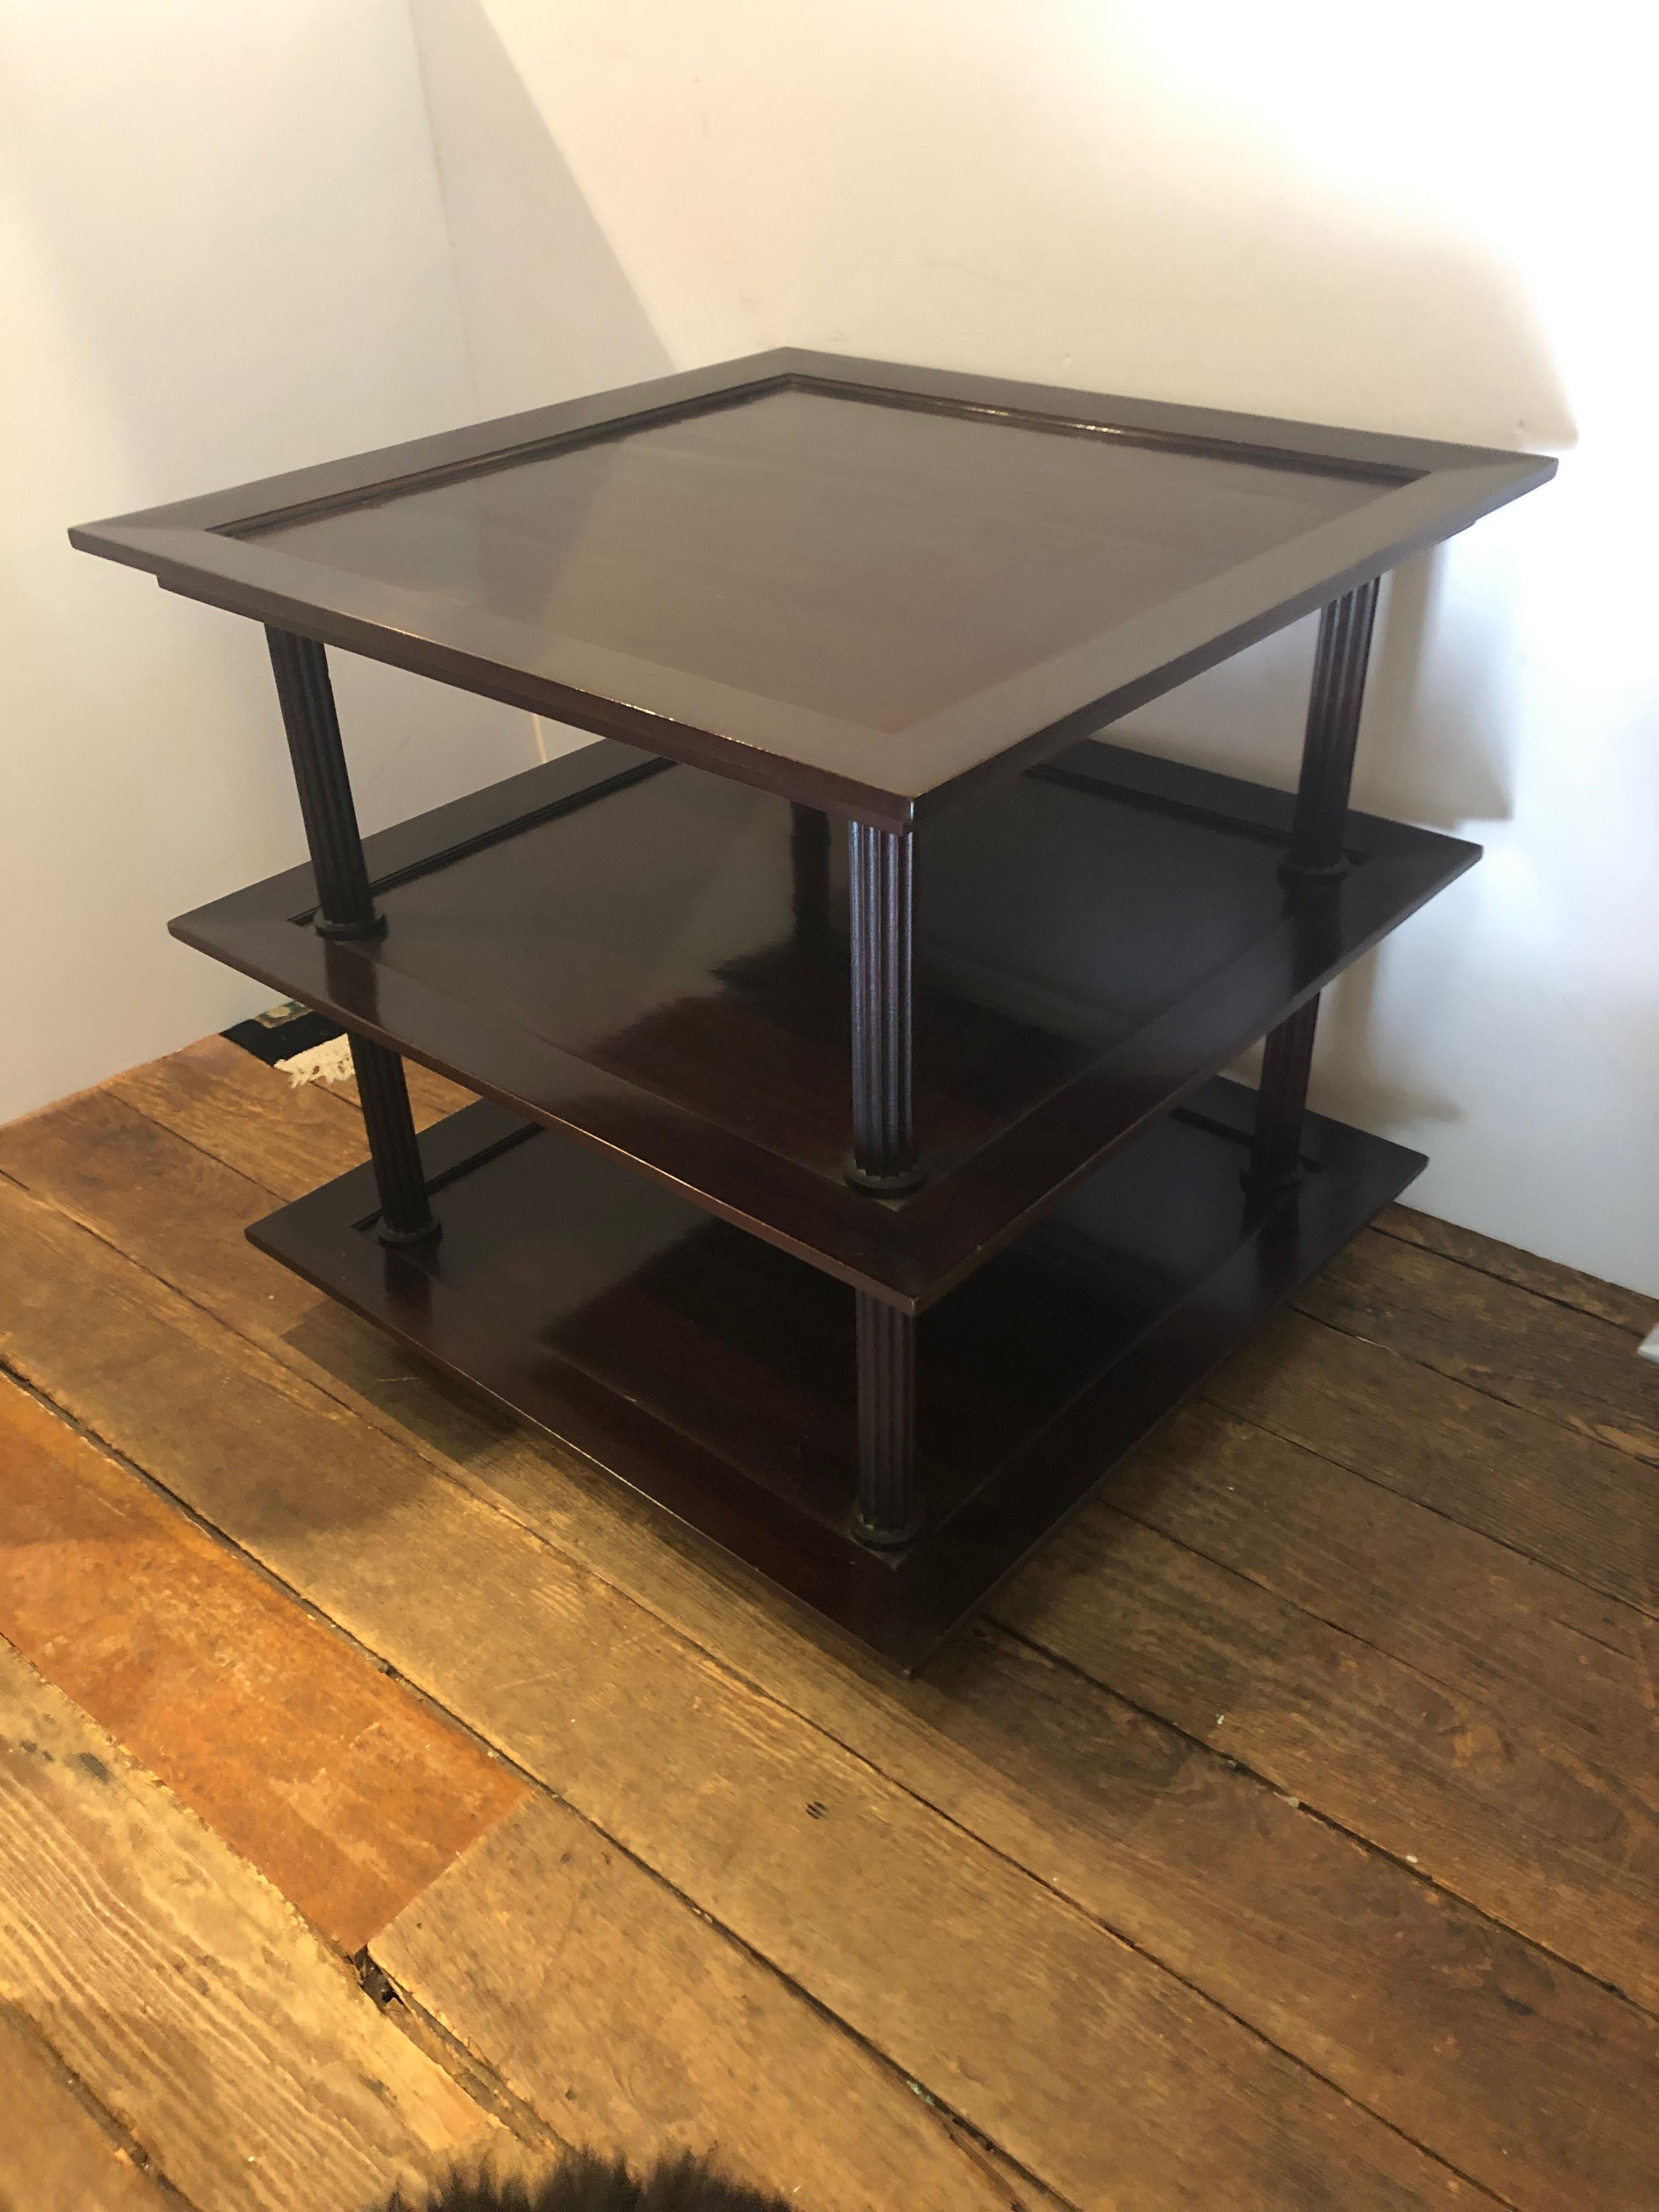 Two pristine very stylish 3-tier side tables by esteemed designer Barbara Barry for Baker, having reeded columns in each corner and a rich Java finish. The top tier has bevelled piece of glass that fits perfectly.